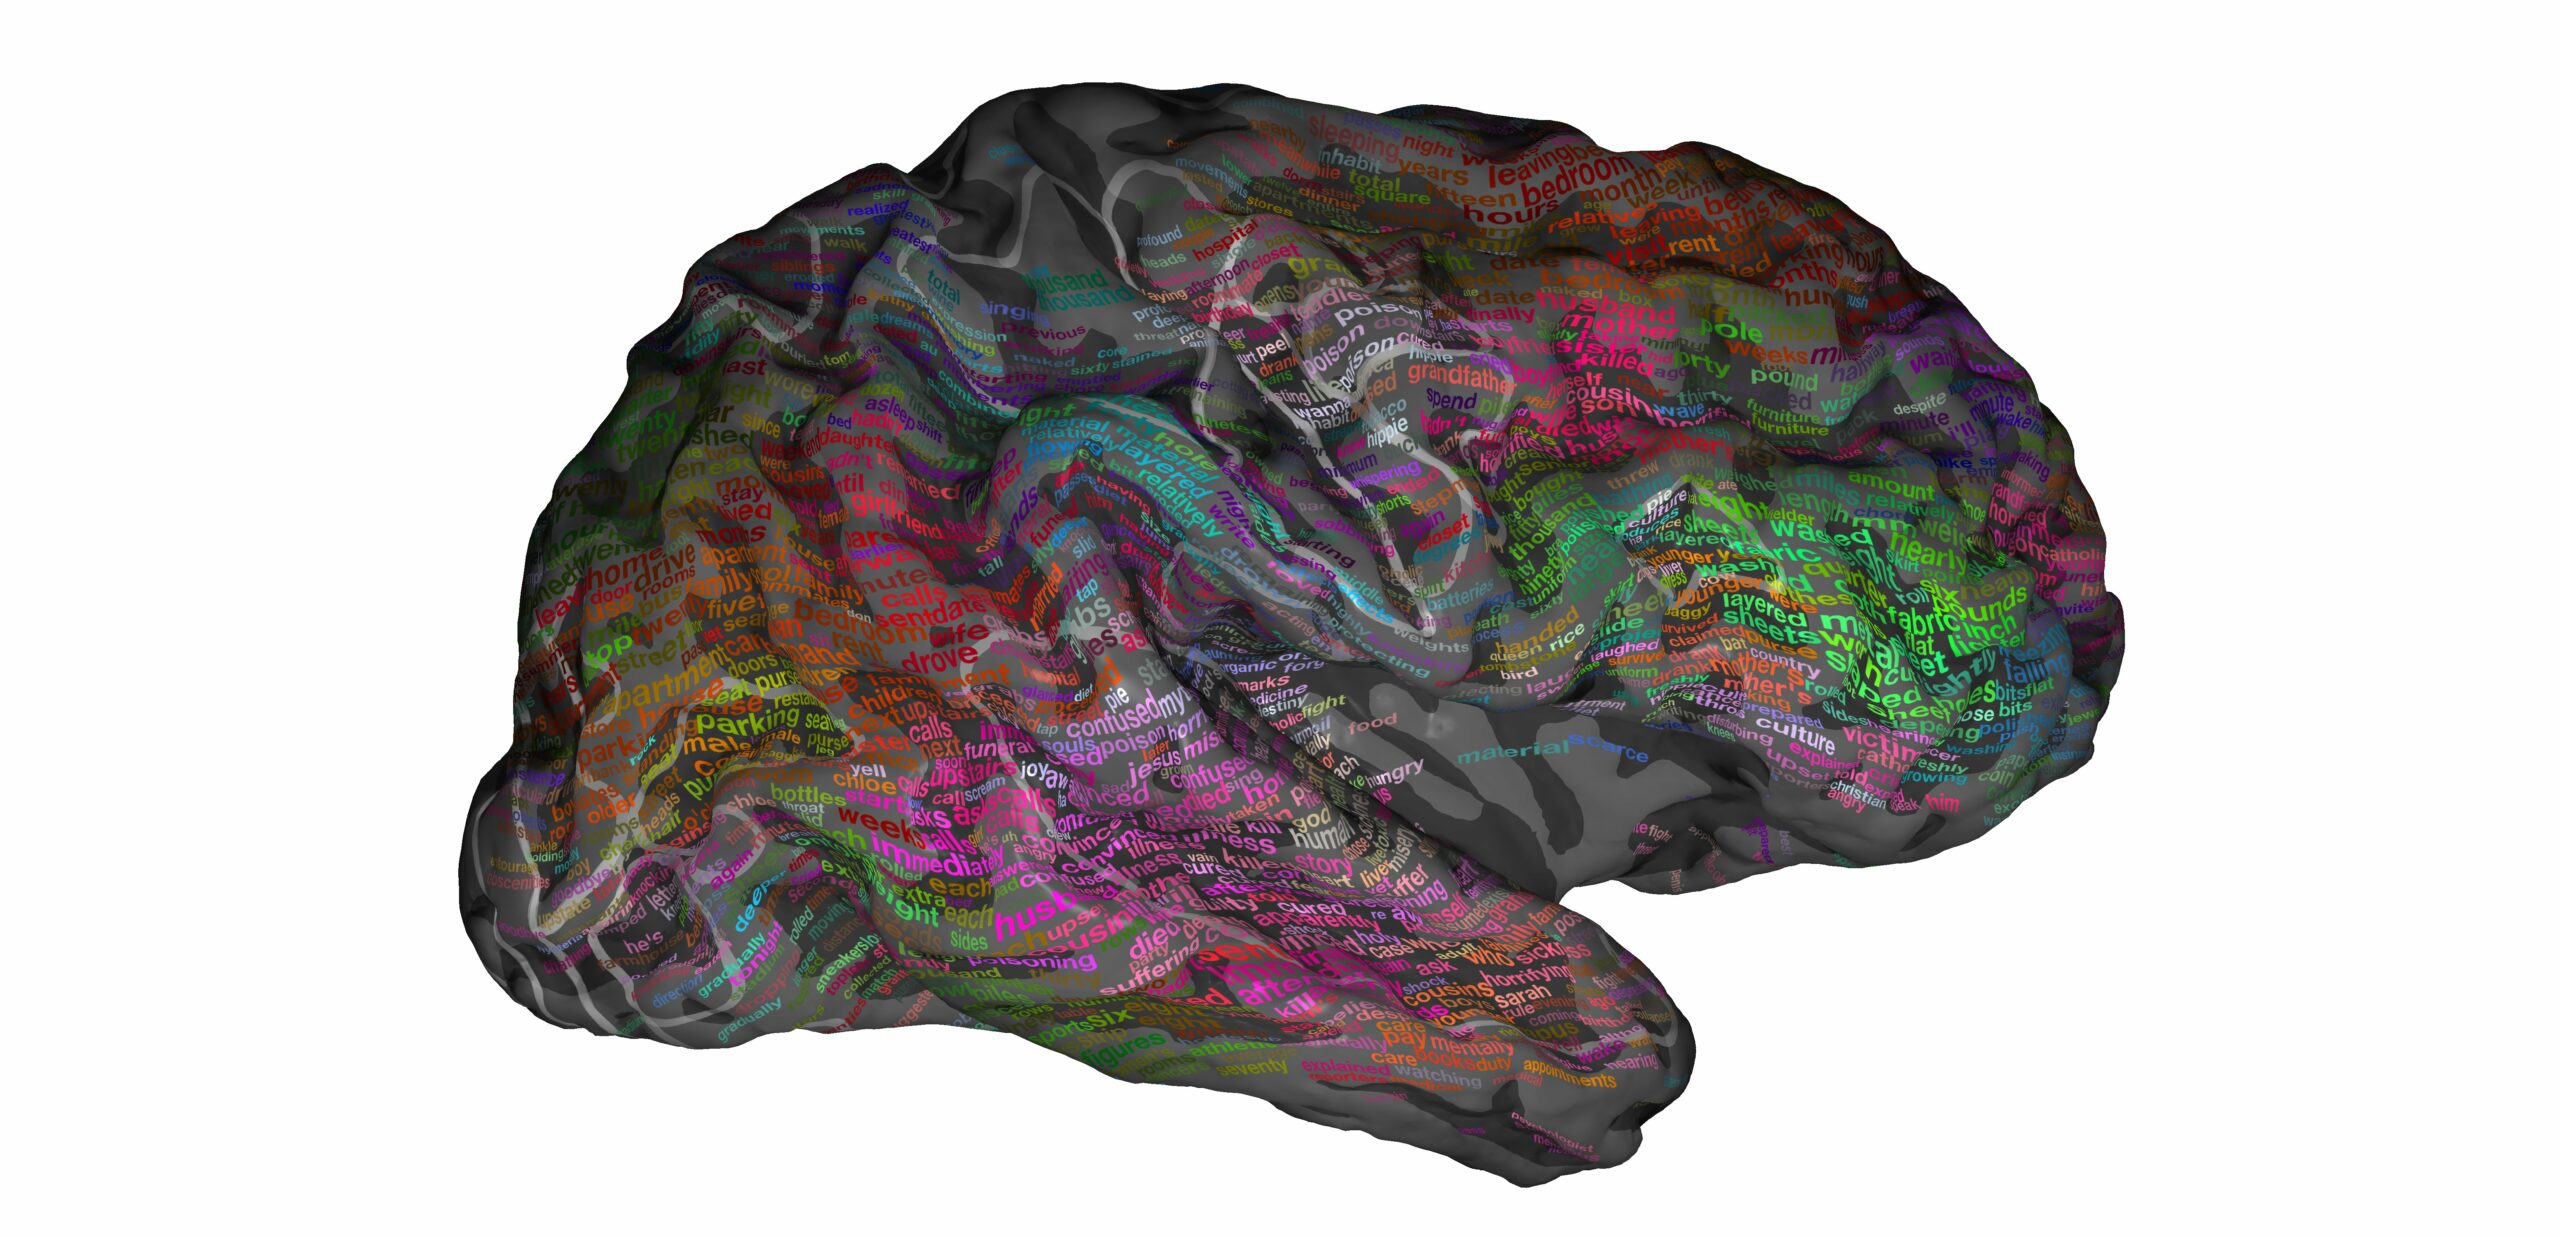 A 3D Map Of The Brain Shows How We Understand Language